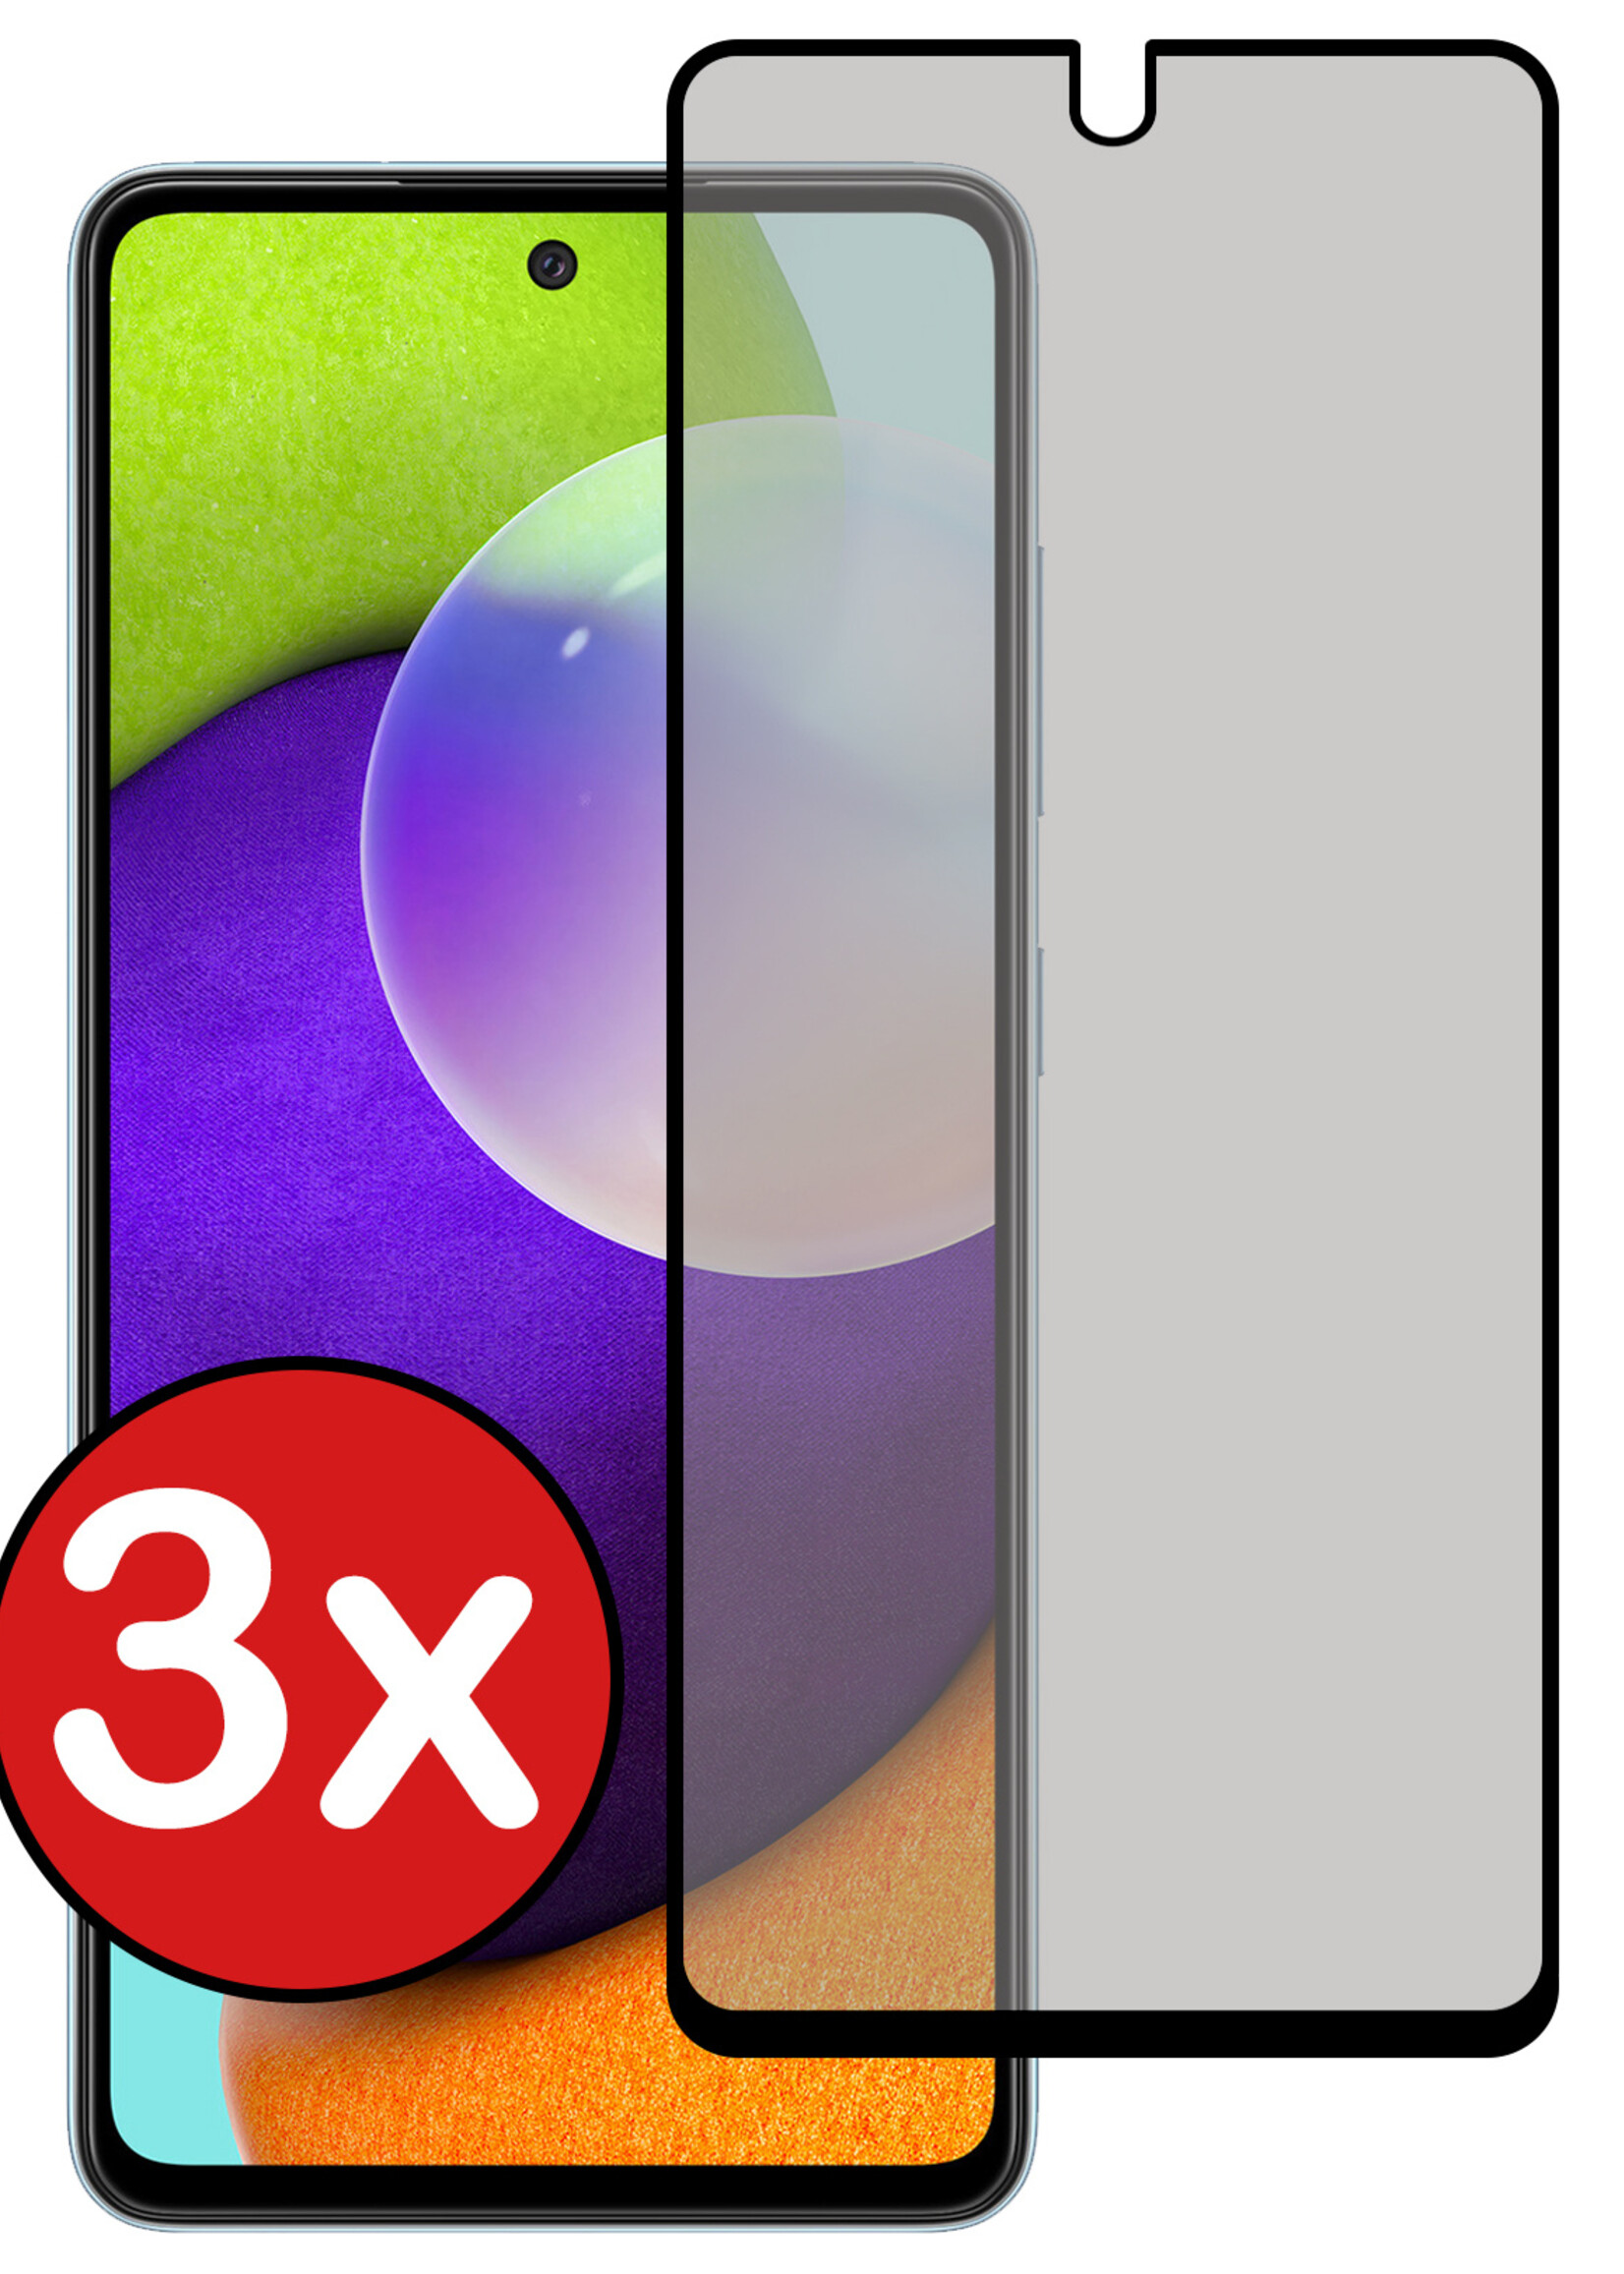 BTH Screenprotector Geschikt voor Samsung A52 Screenprotector Privacy Glas Gehard Full Cover - Screenprotector Geschikt voor Samsung Galaxy A52 Screenprotector Privacy Tempered Glass - 3 PACK